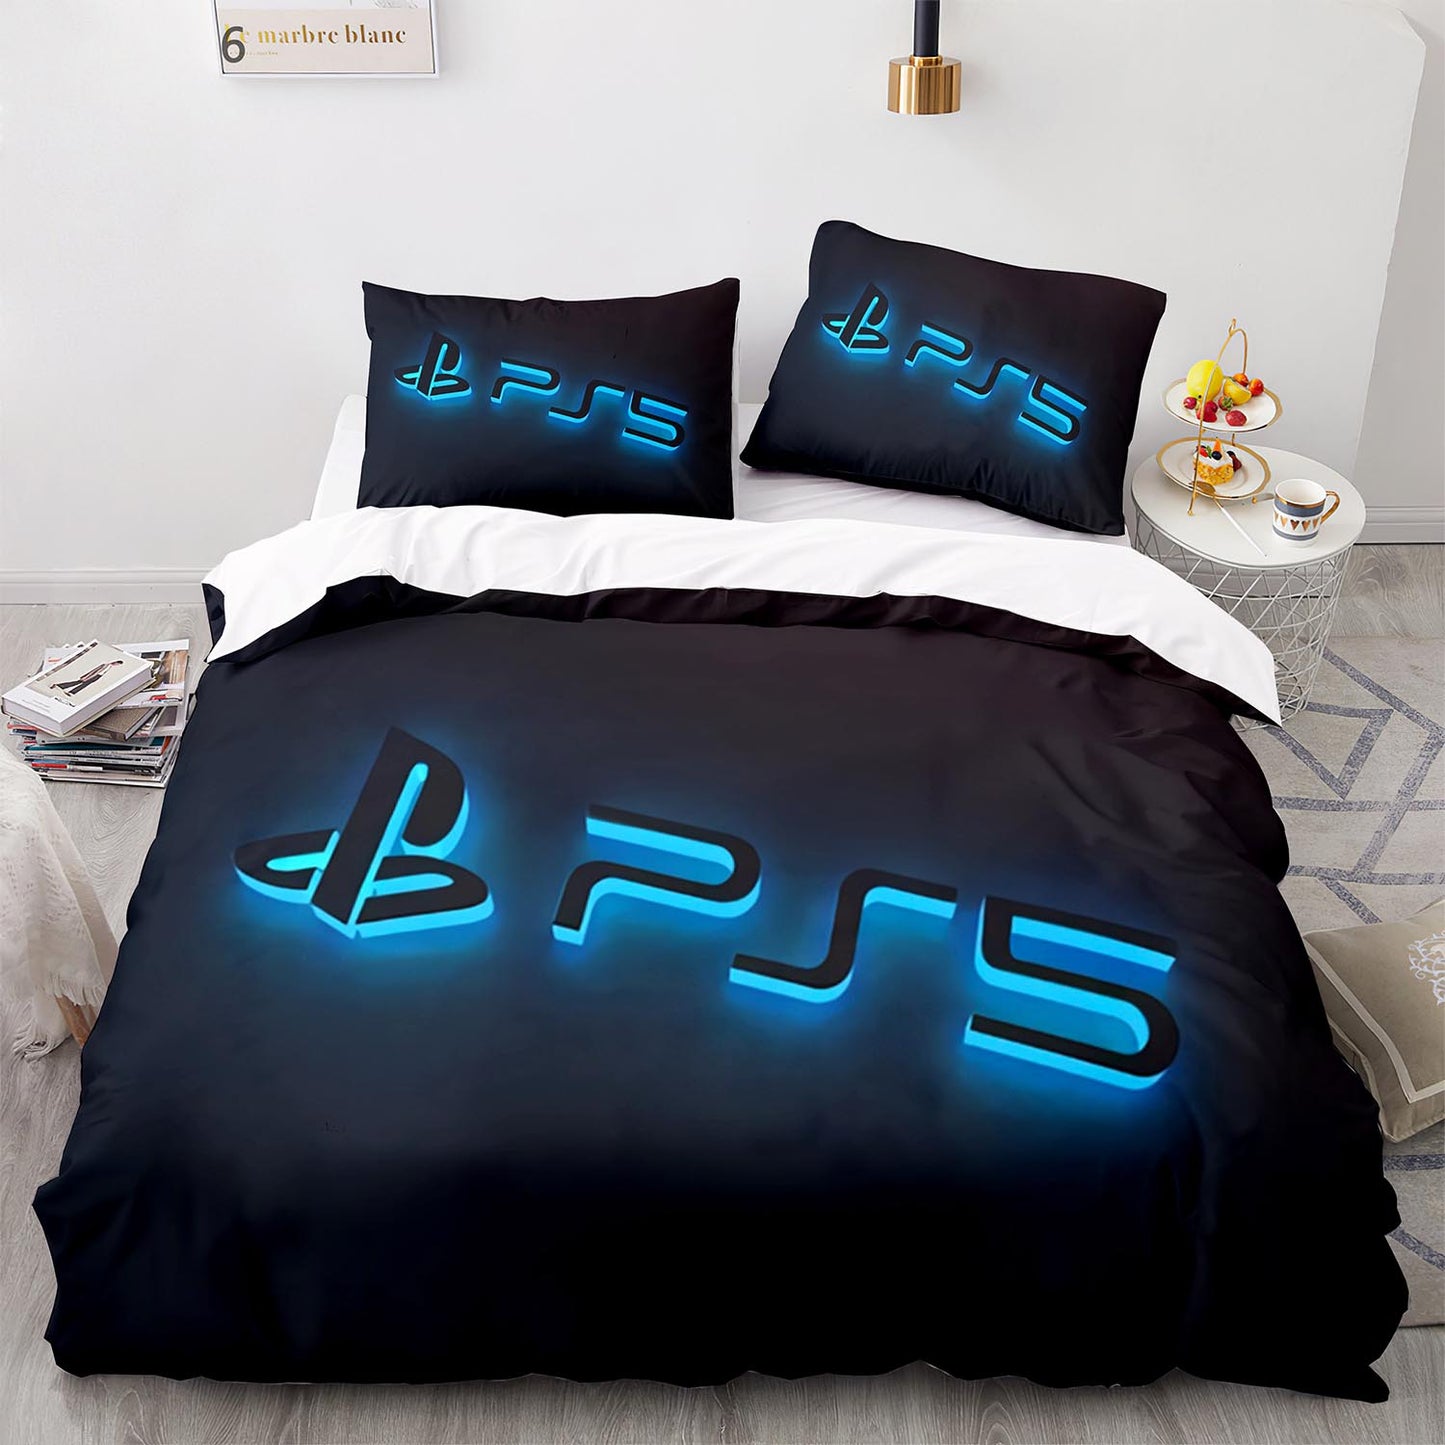 Customize Photo Logo Duvet Cover Boys Girls Adults Gift Custom Made DIY Bedding Set Designer Bed Set Queen Size Quilt Cover   PS1025